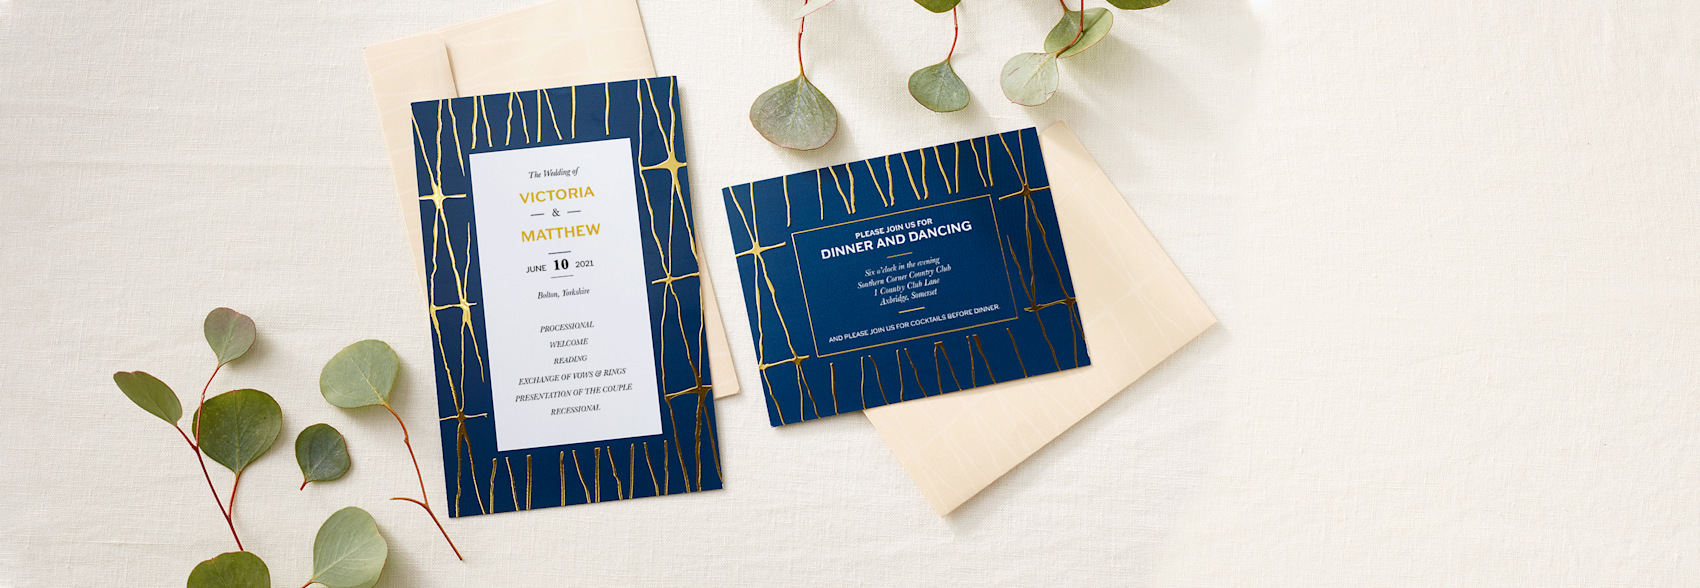 Wedding programs with gold foil finish